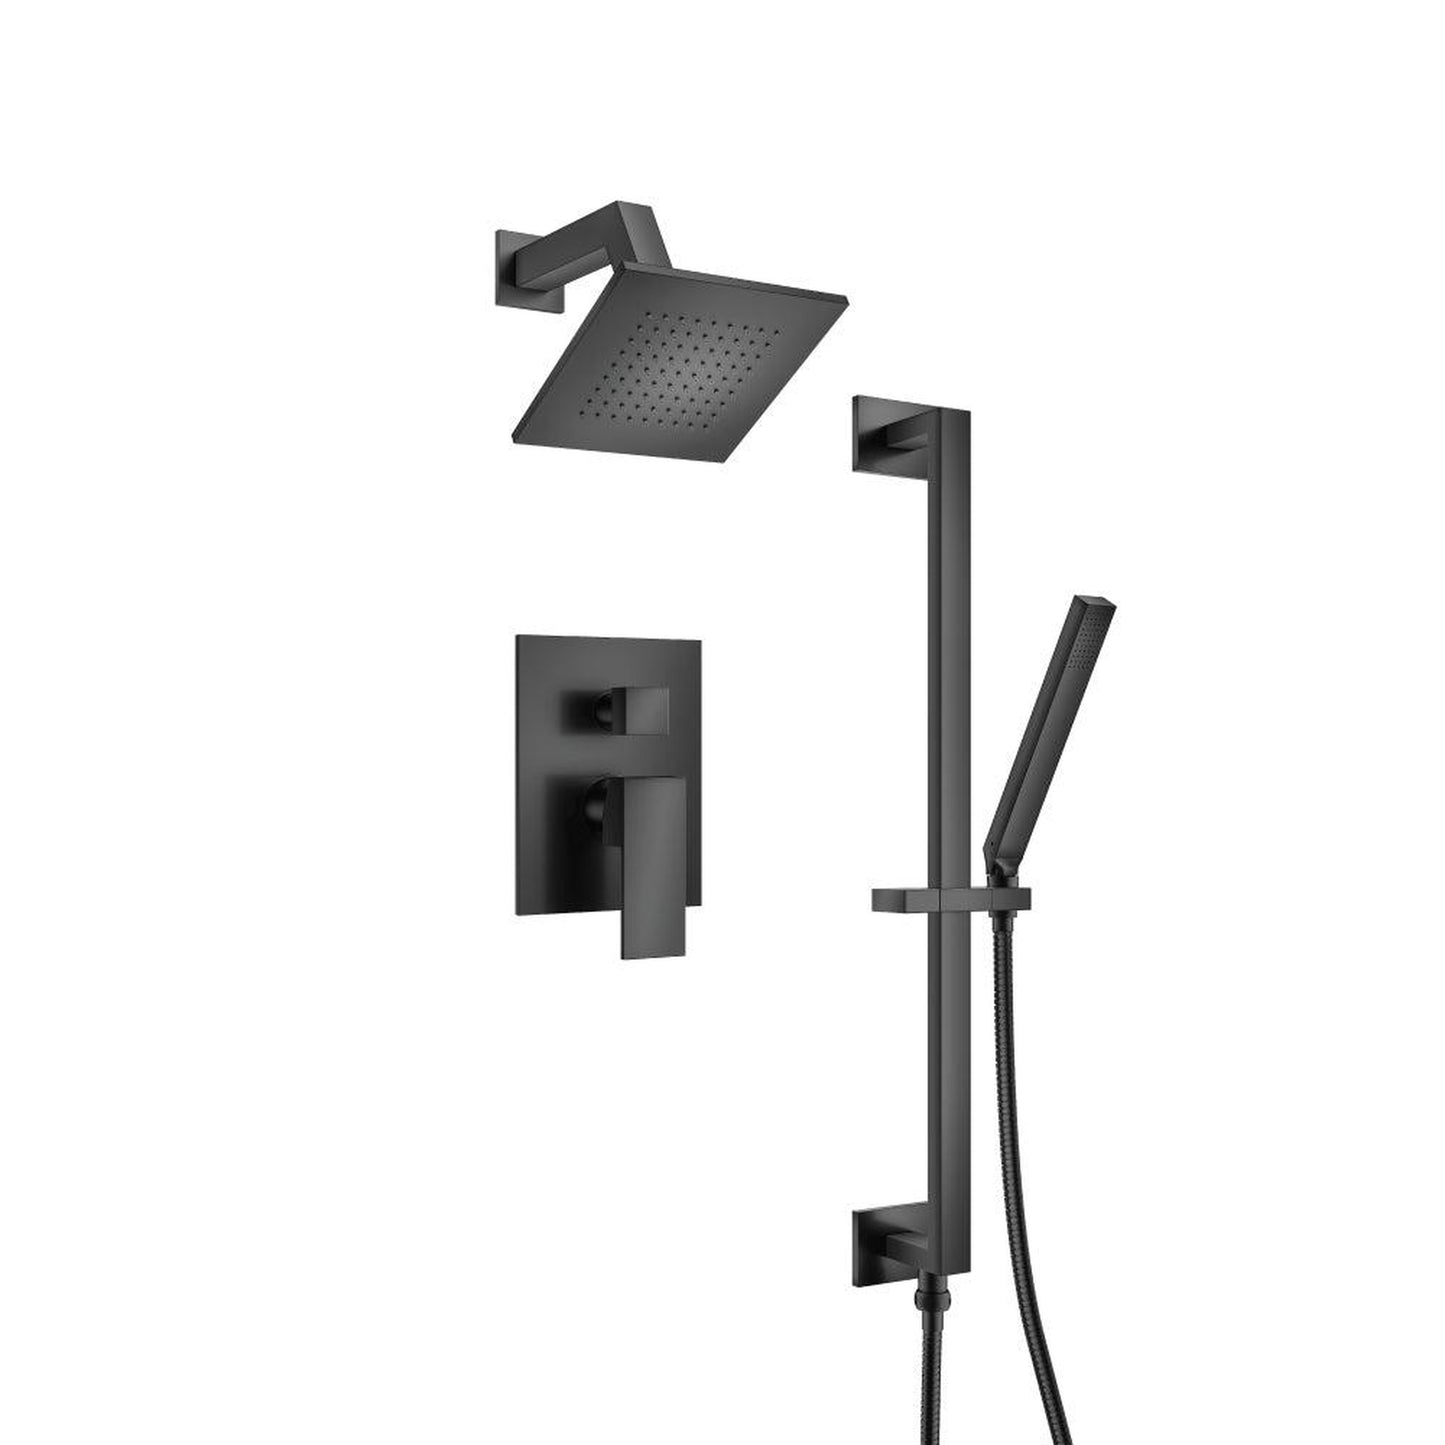 Isenberg Serie 160 Two Output Shower Set With Shower Head, Hand Held and Slide Bar in Matte Black (160.3400MB)